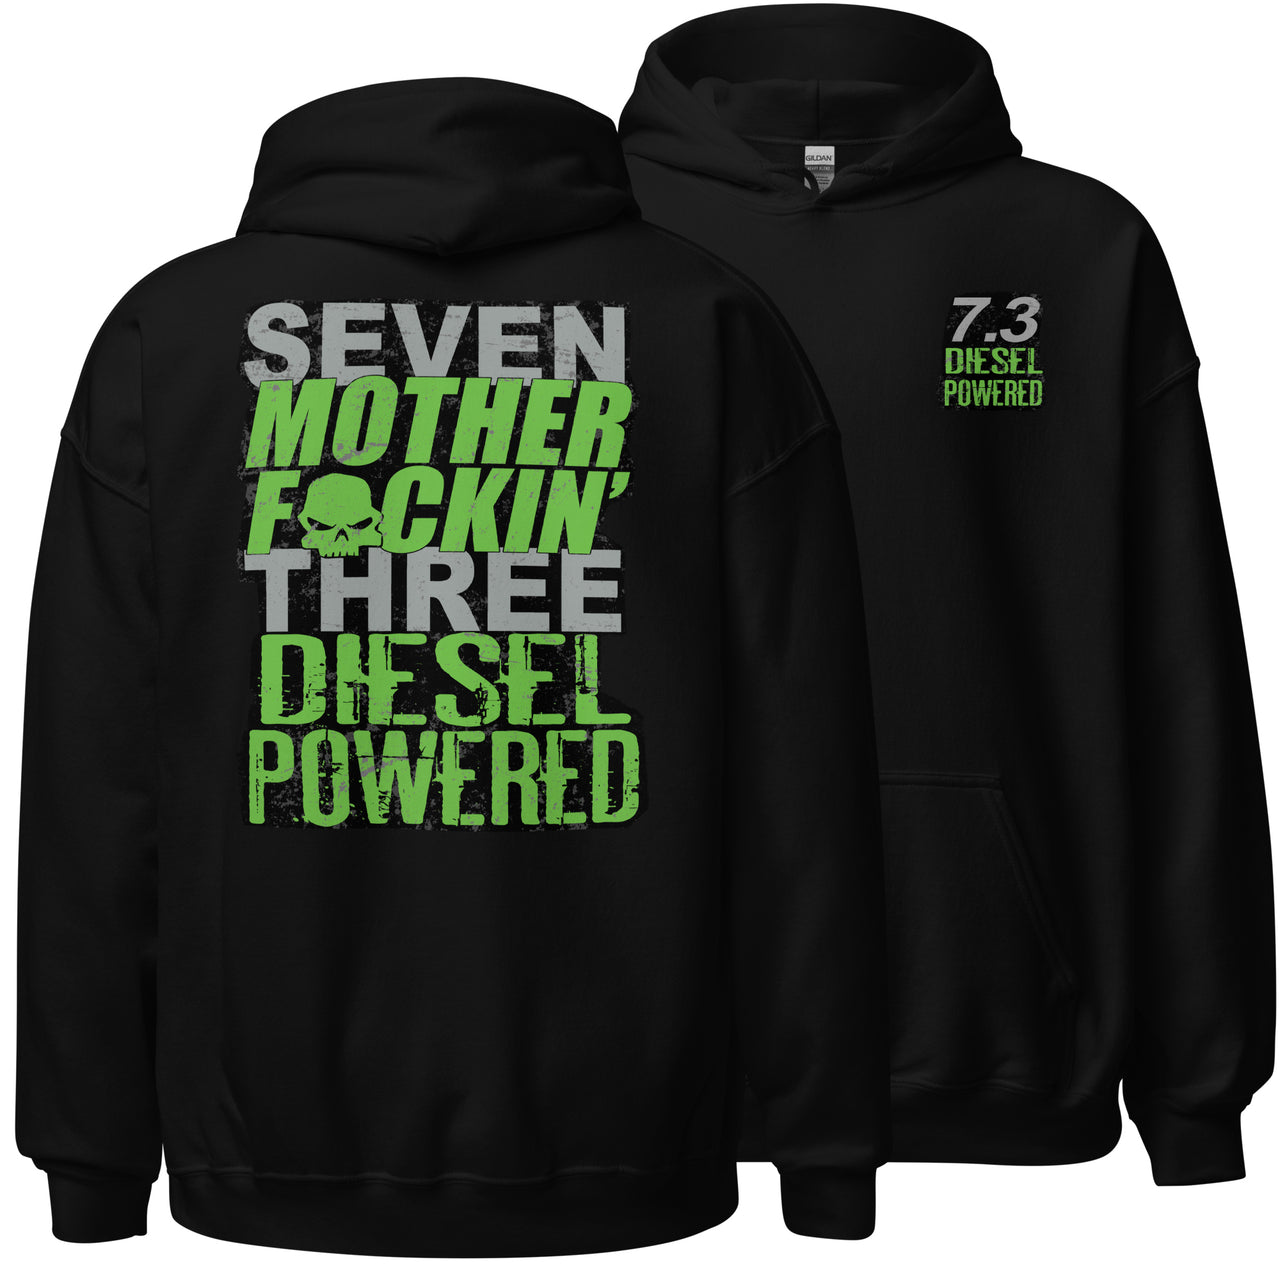 7.3 Power Stroke Hoodie From Aggressive Thread - Black